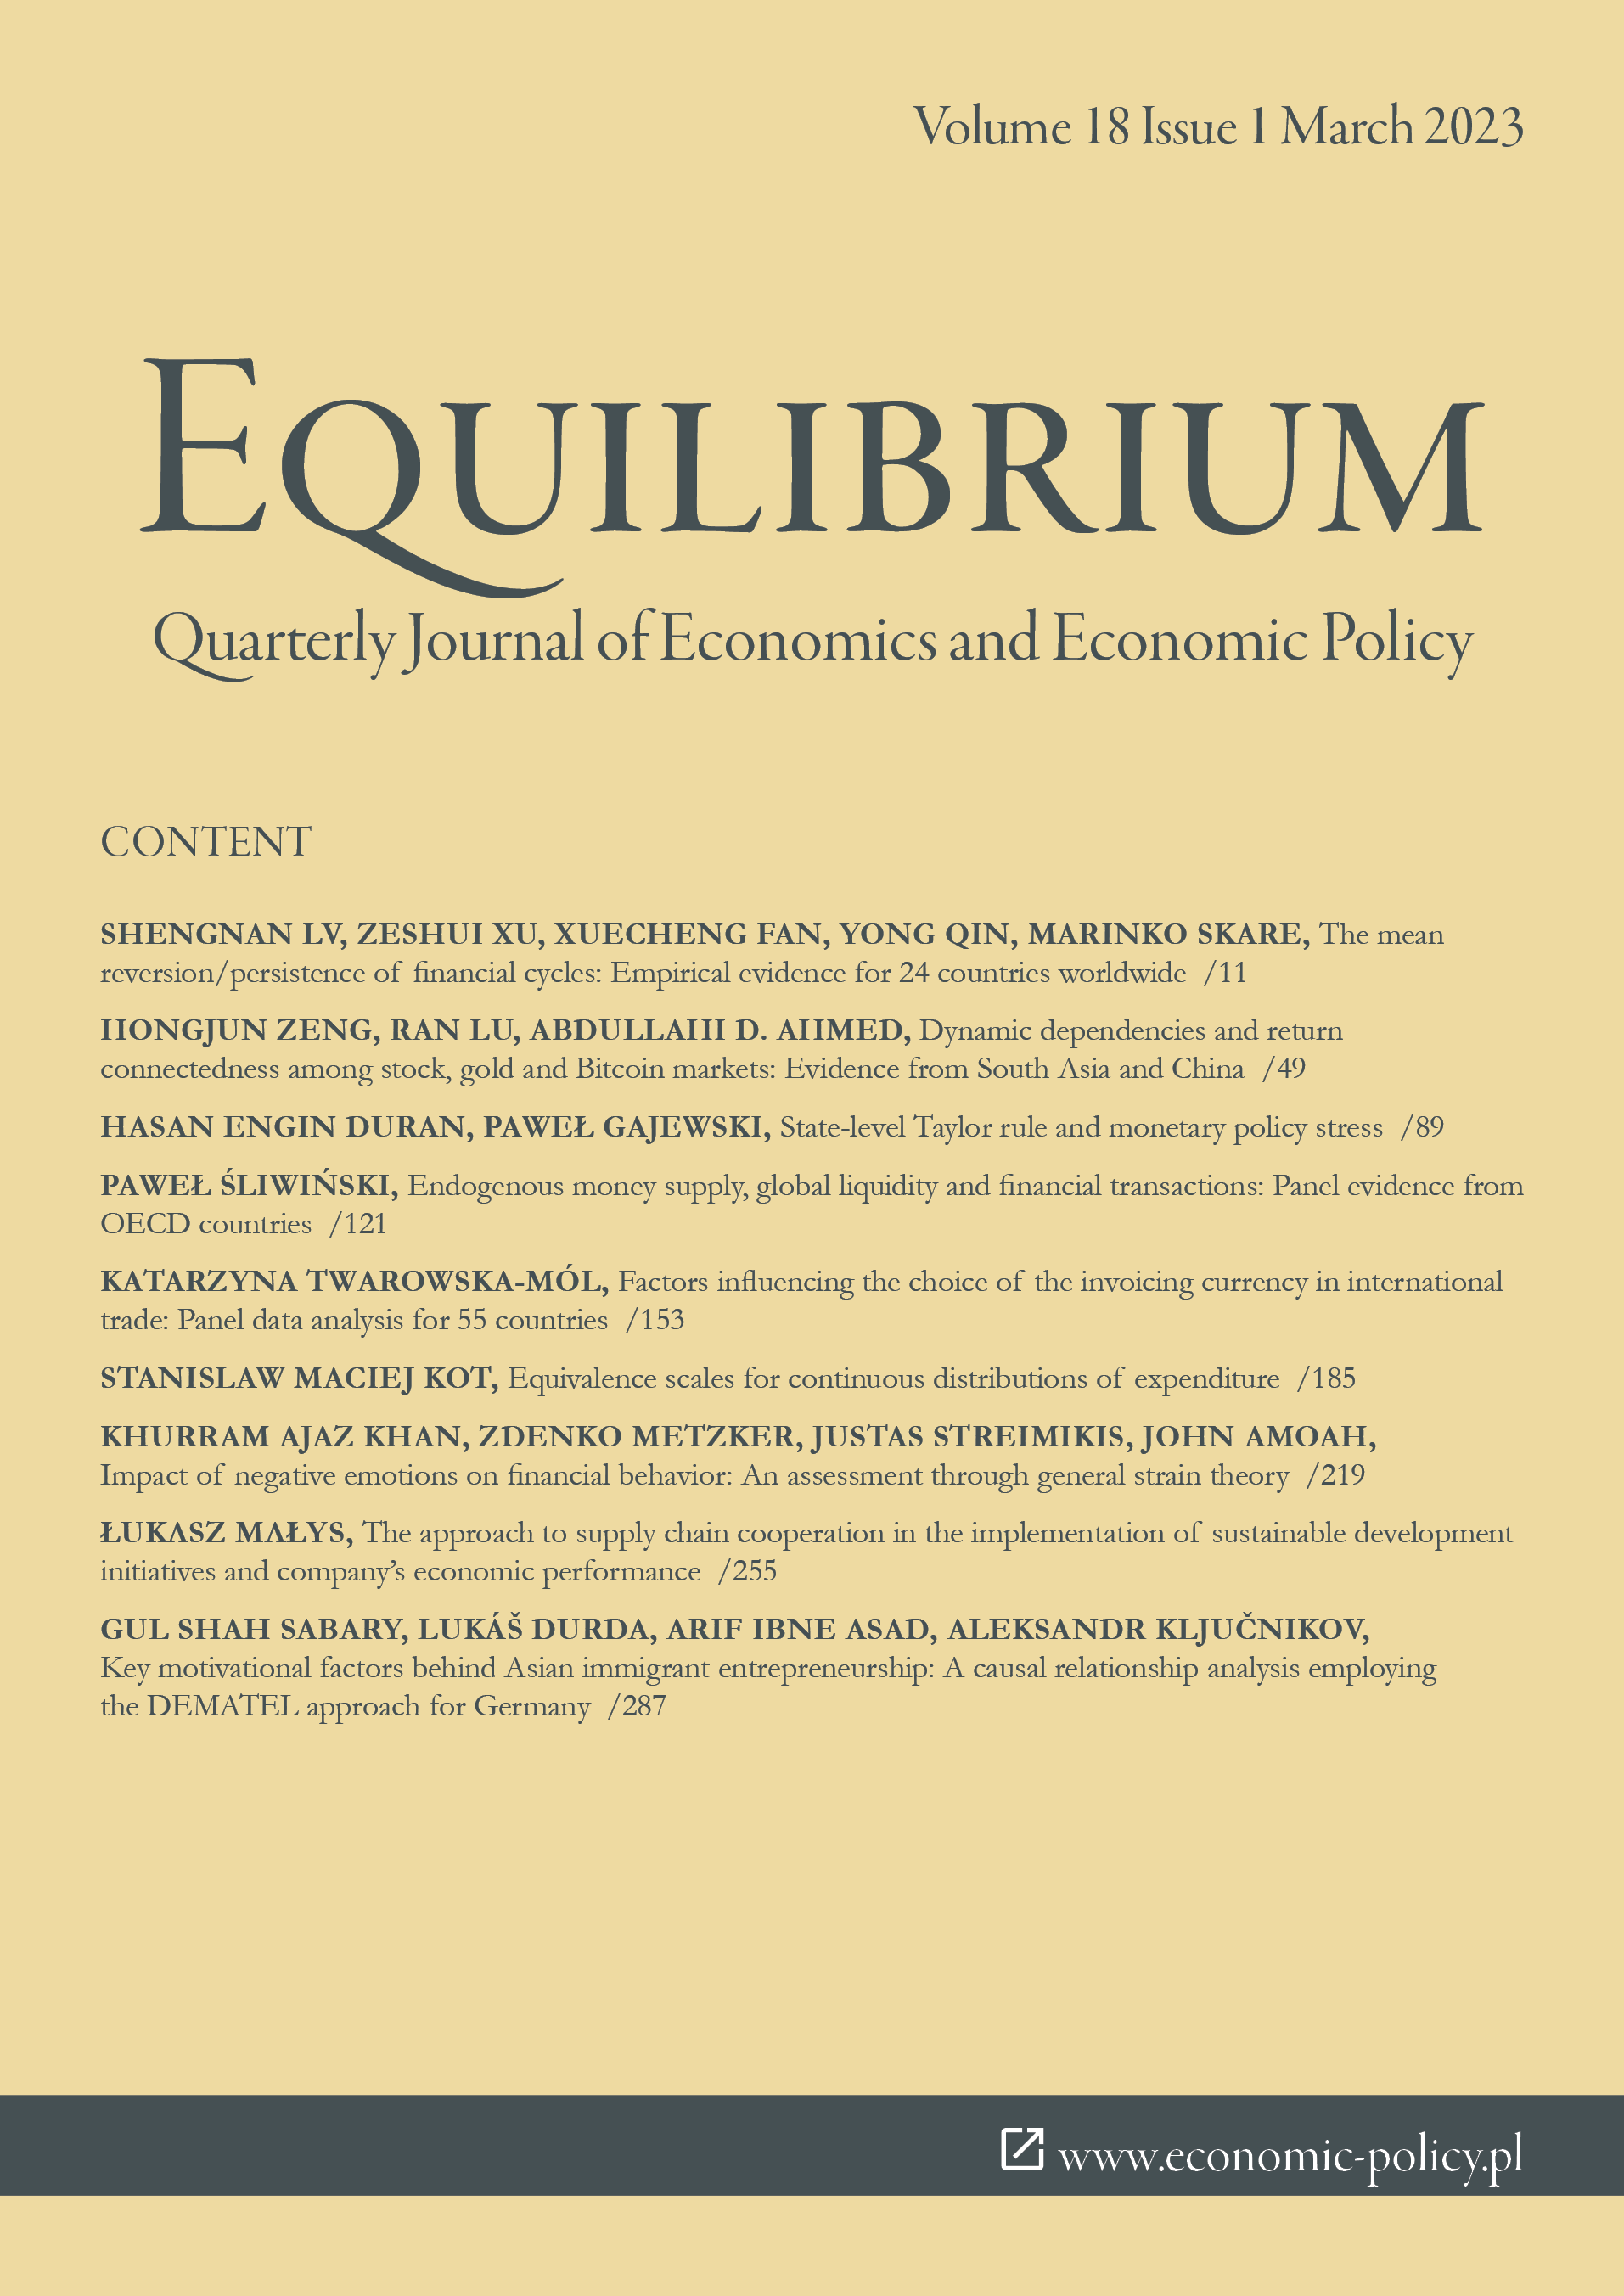 The mean reversion/persistence of financial cycles: Empirical evidence for 24 countries worldwide Cover Image